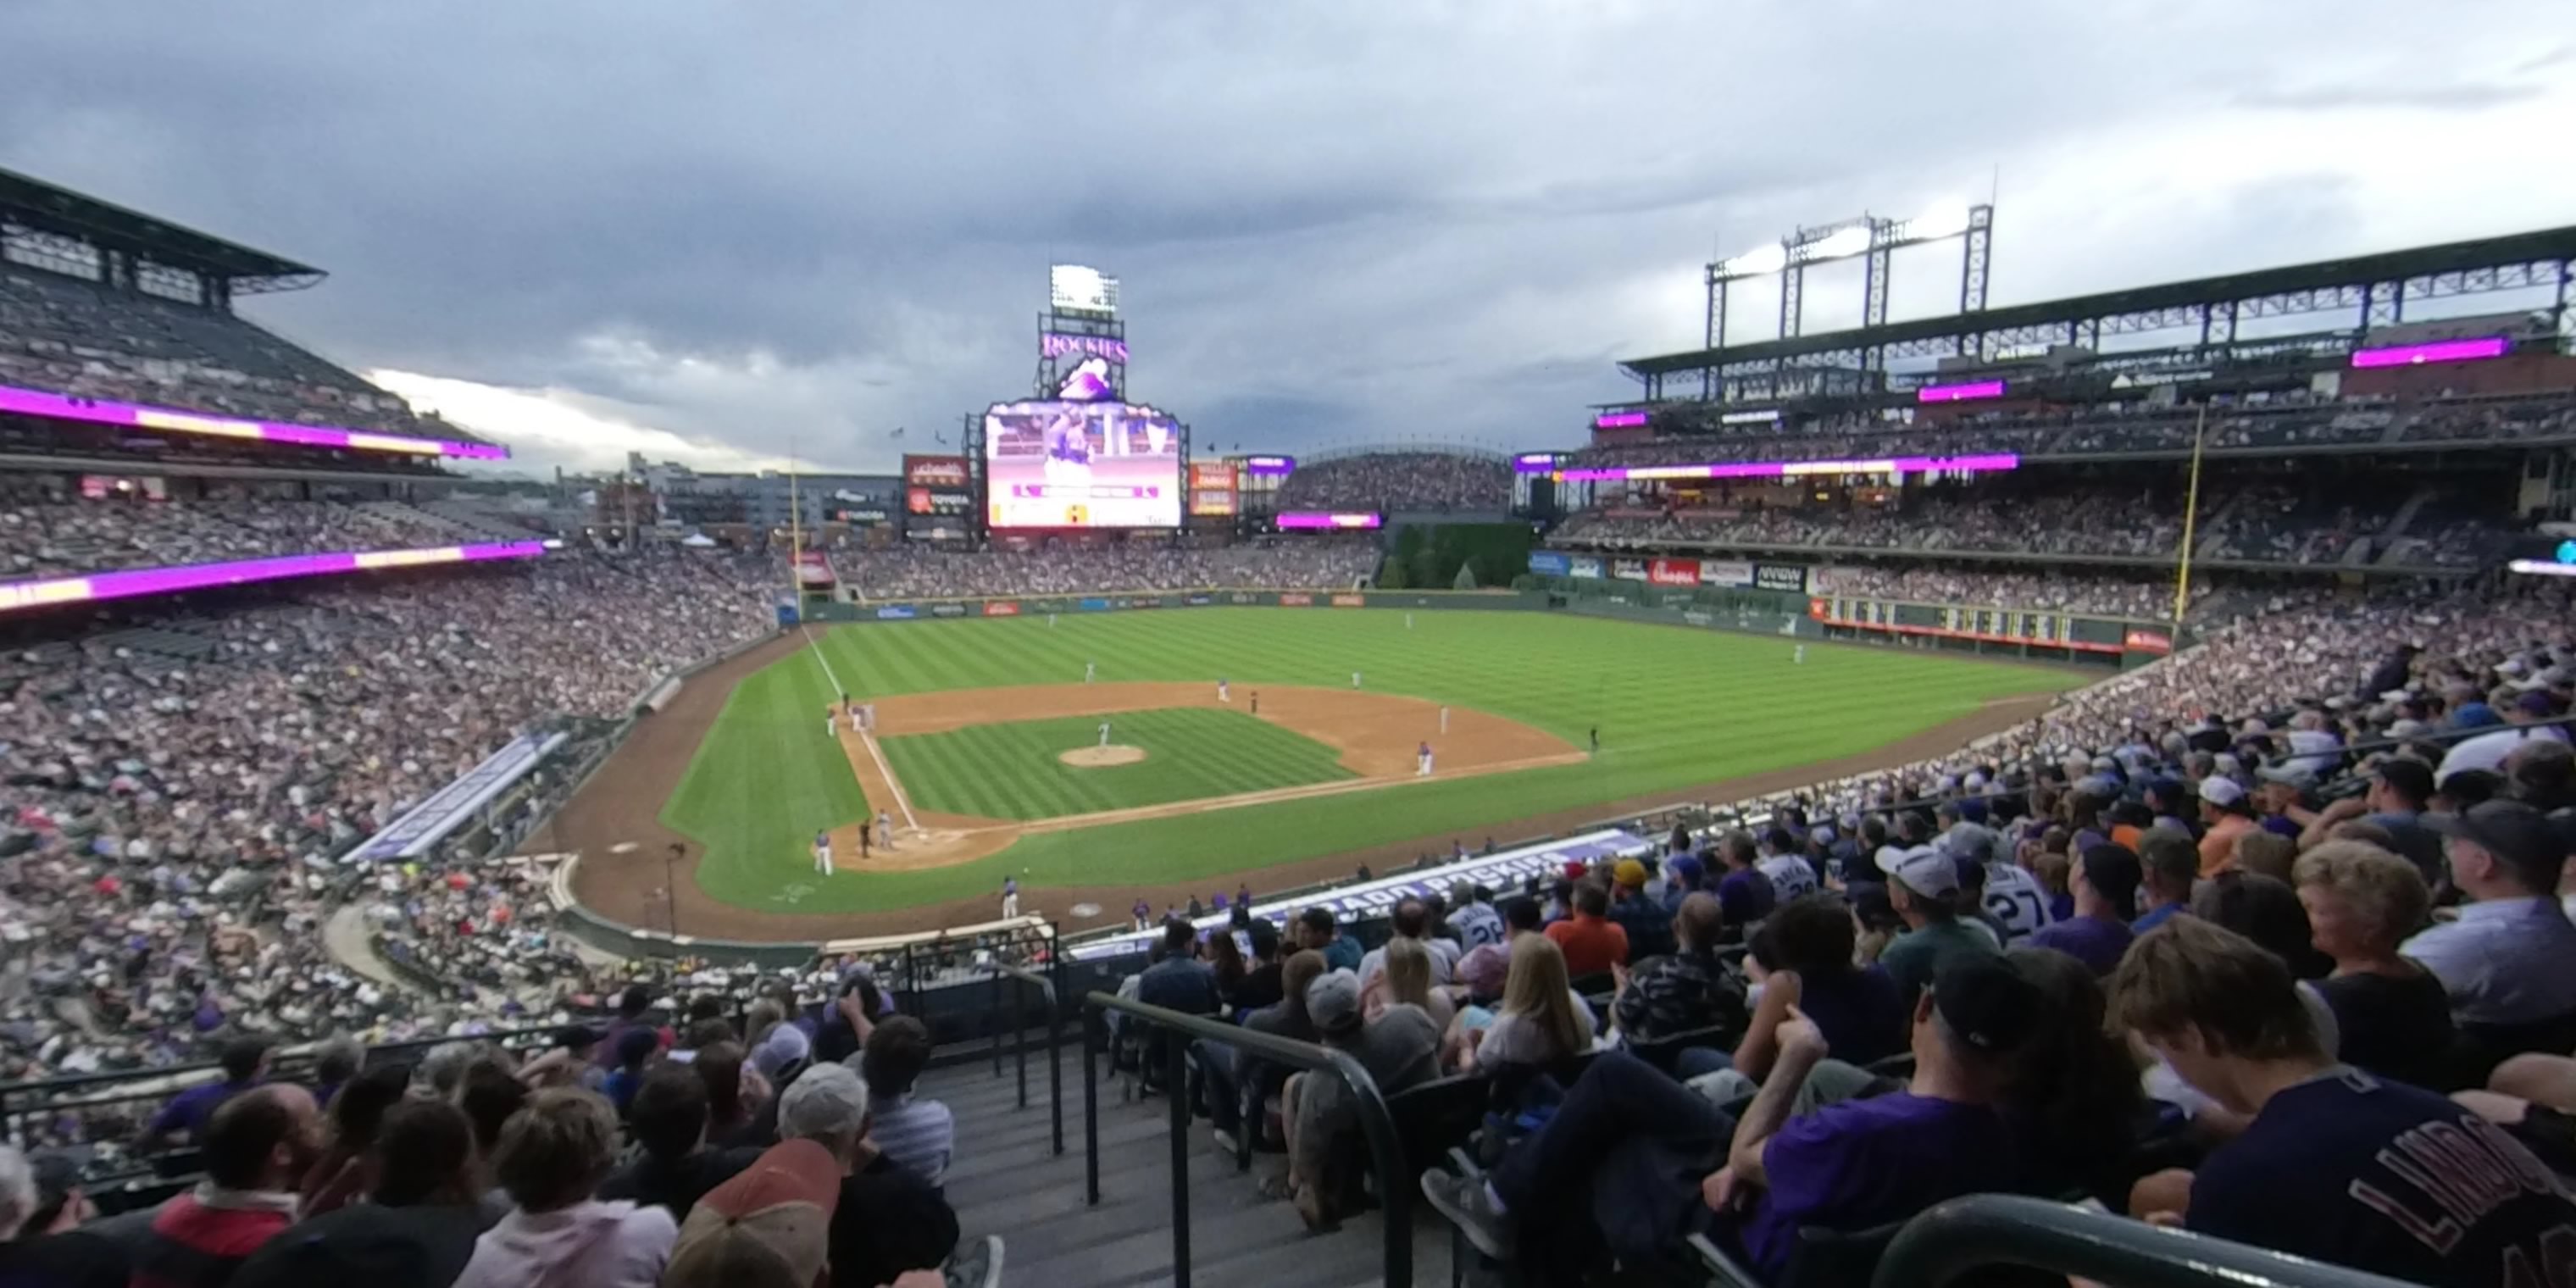 Section 226 at Coors Field 